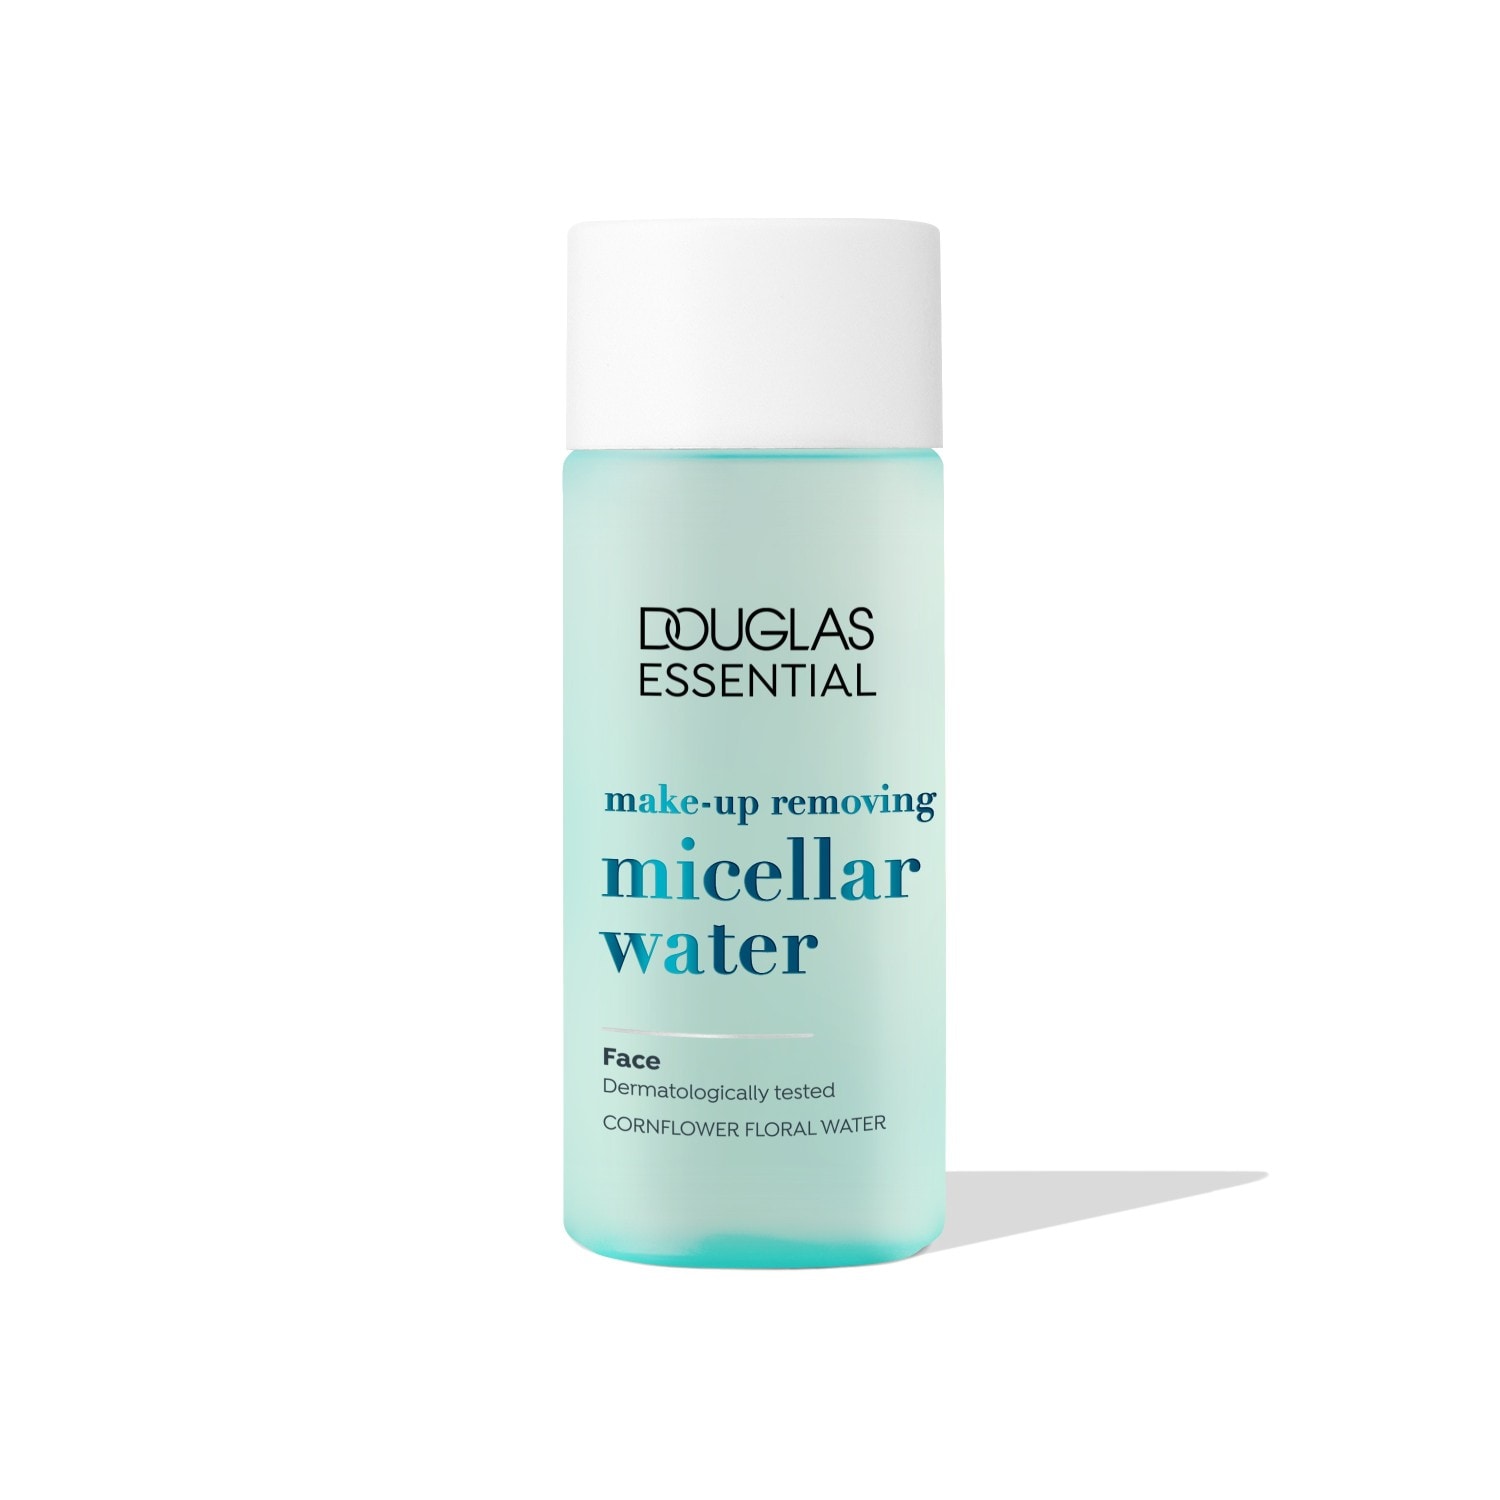 Douglas Collection Essential Cleansing Eyes & Face Make-up Removing Micellar Water